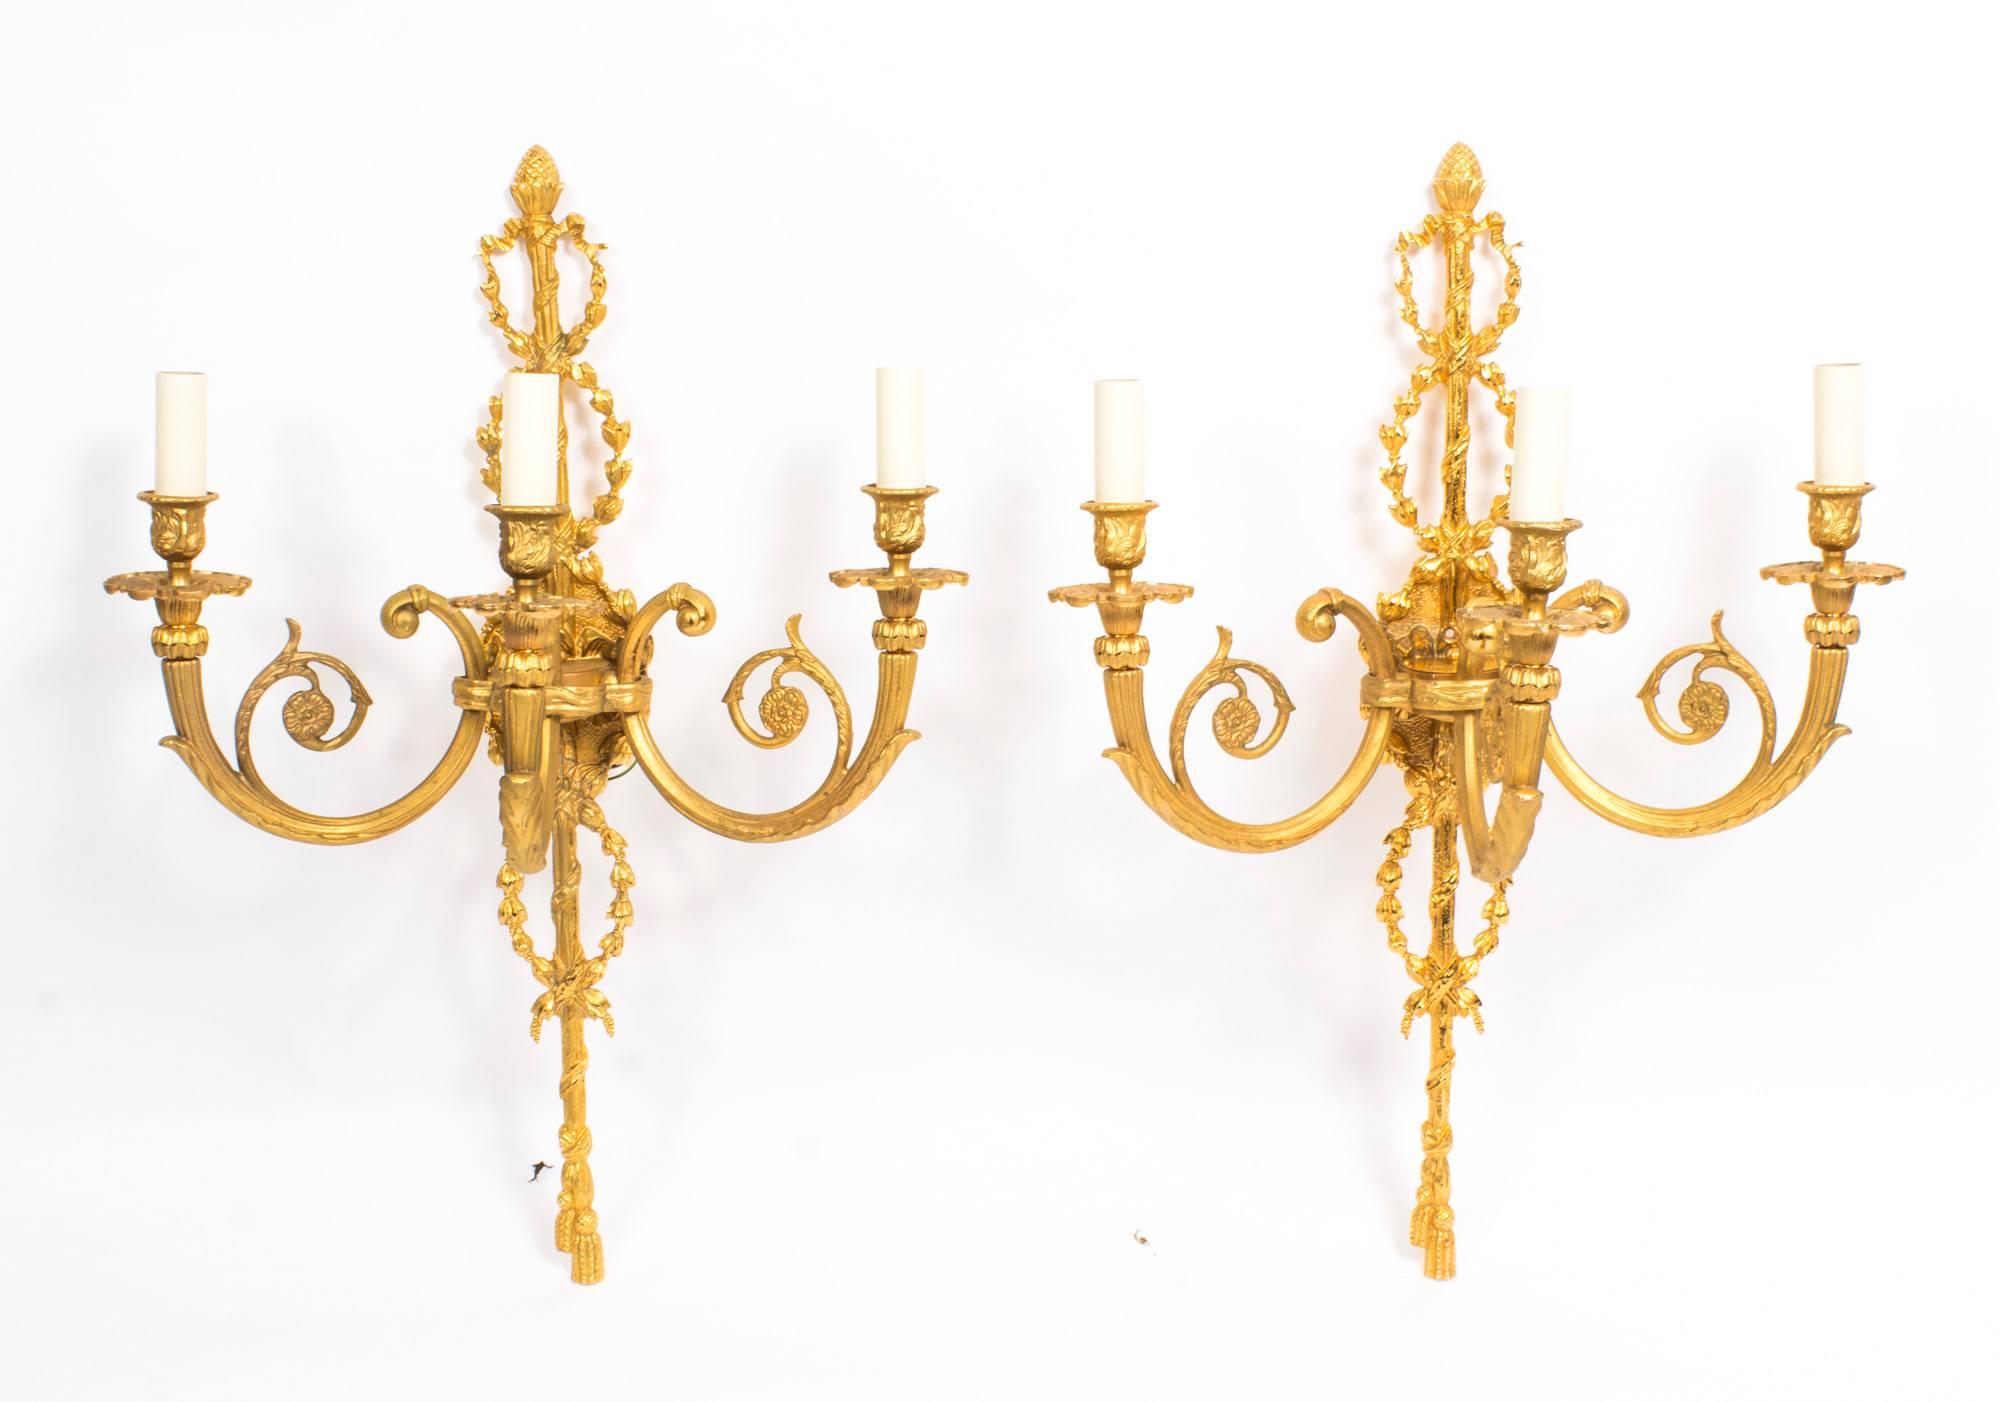 This is a stunning pair of vintage French neoclassical ormolu gilt bronze three branch wall sconces, circa 1920 in date.

They feature ribbon tied and torch form back plates with laurel swags, scrolling branches with floral ends and urn form